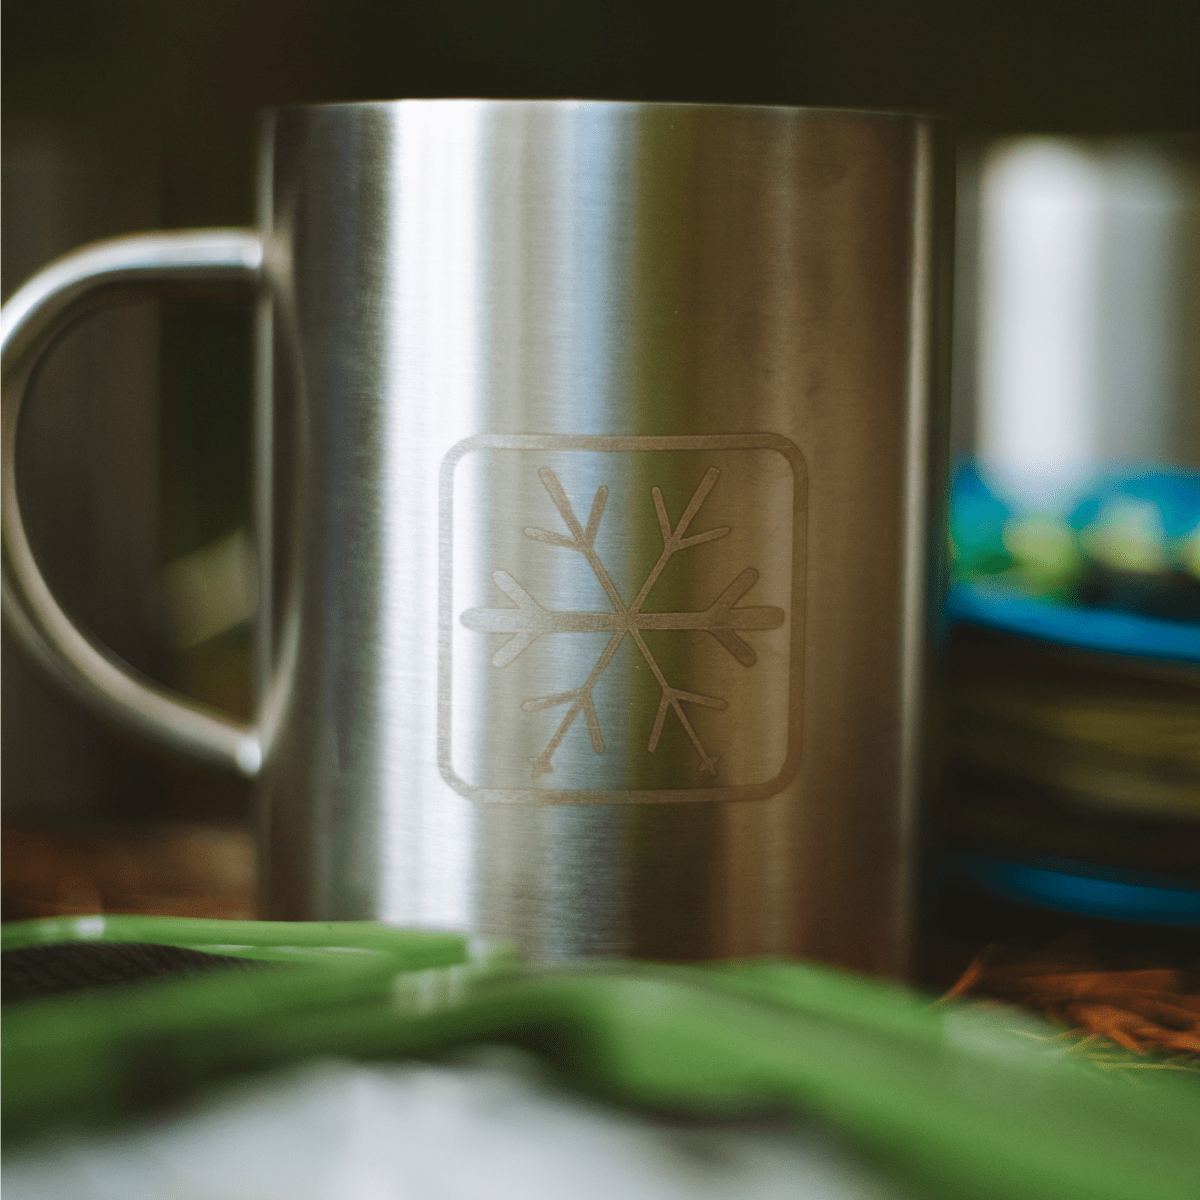 Trxstle Coffee and Cocktail Mugs Set 4-Pack Stainless Steel One Size AC-MUG-4PA-S